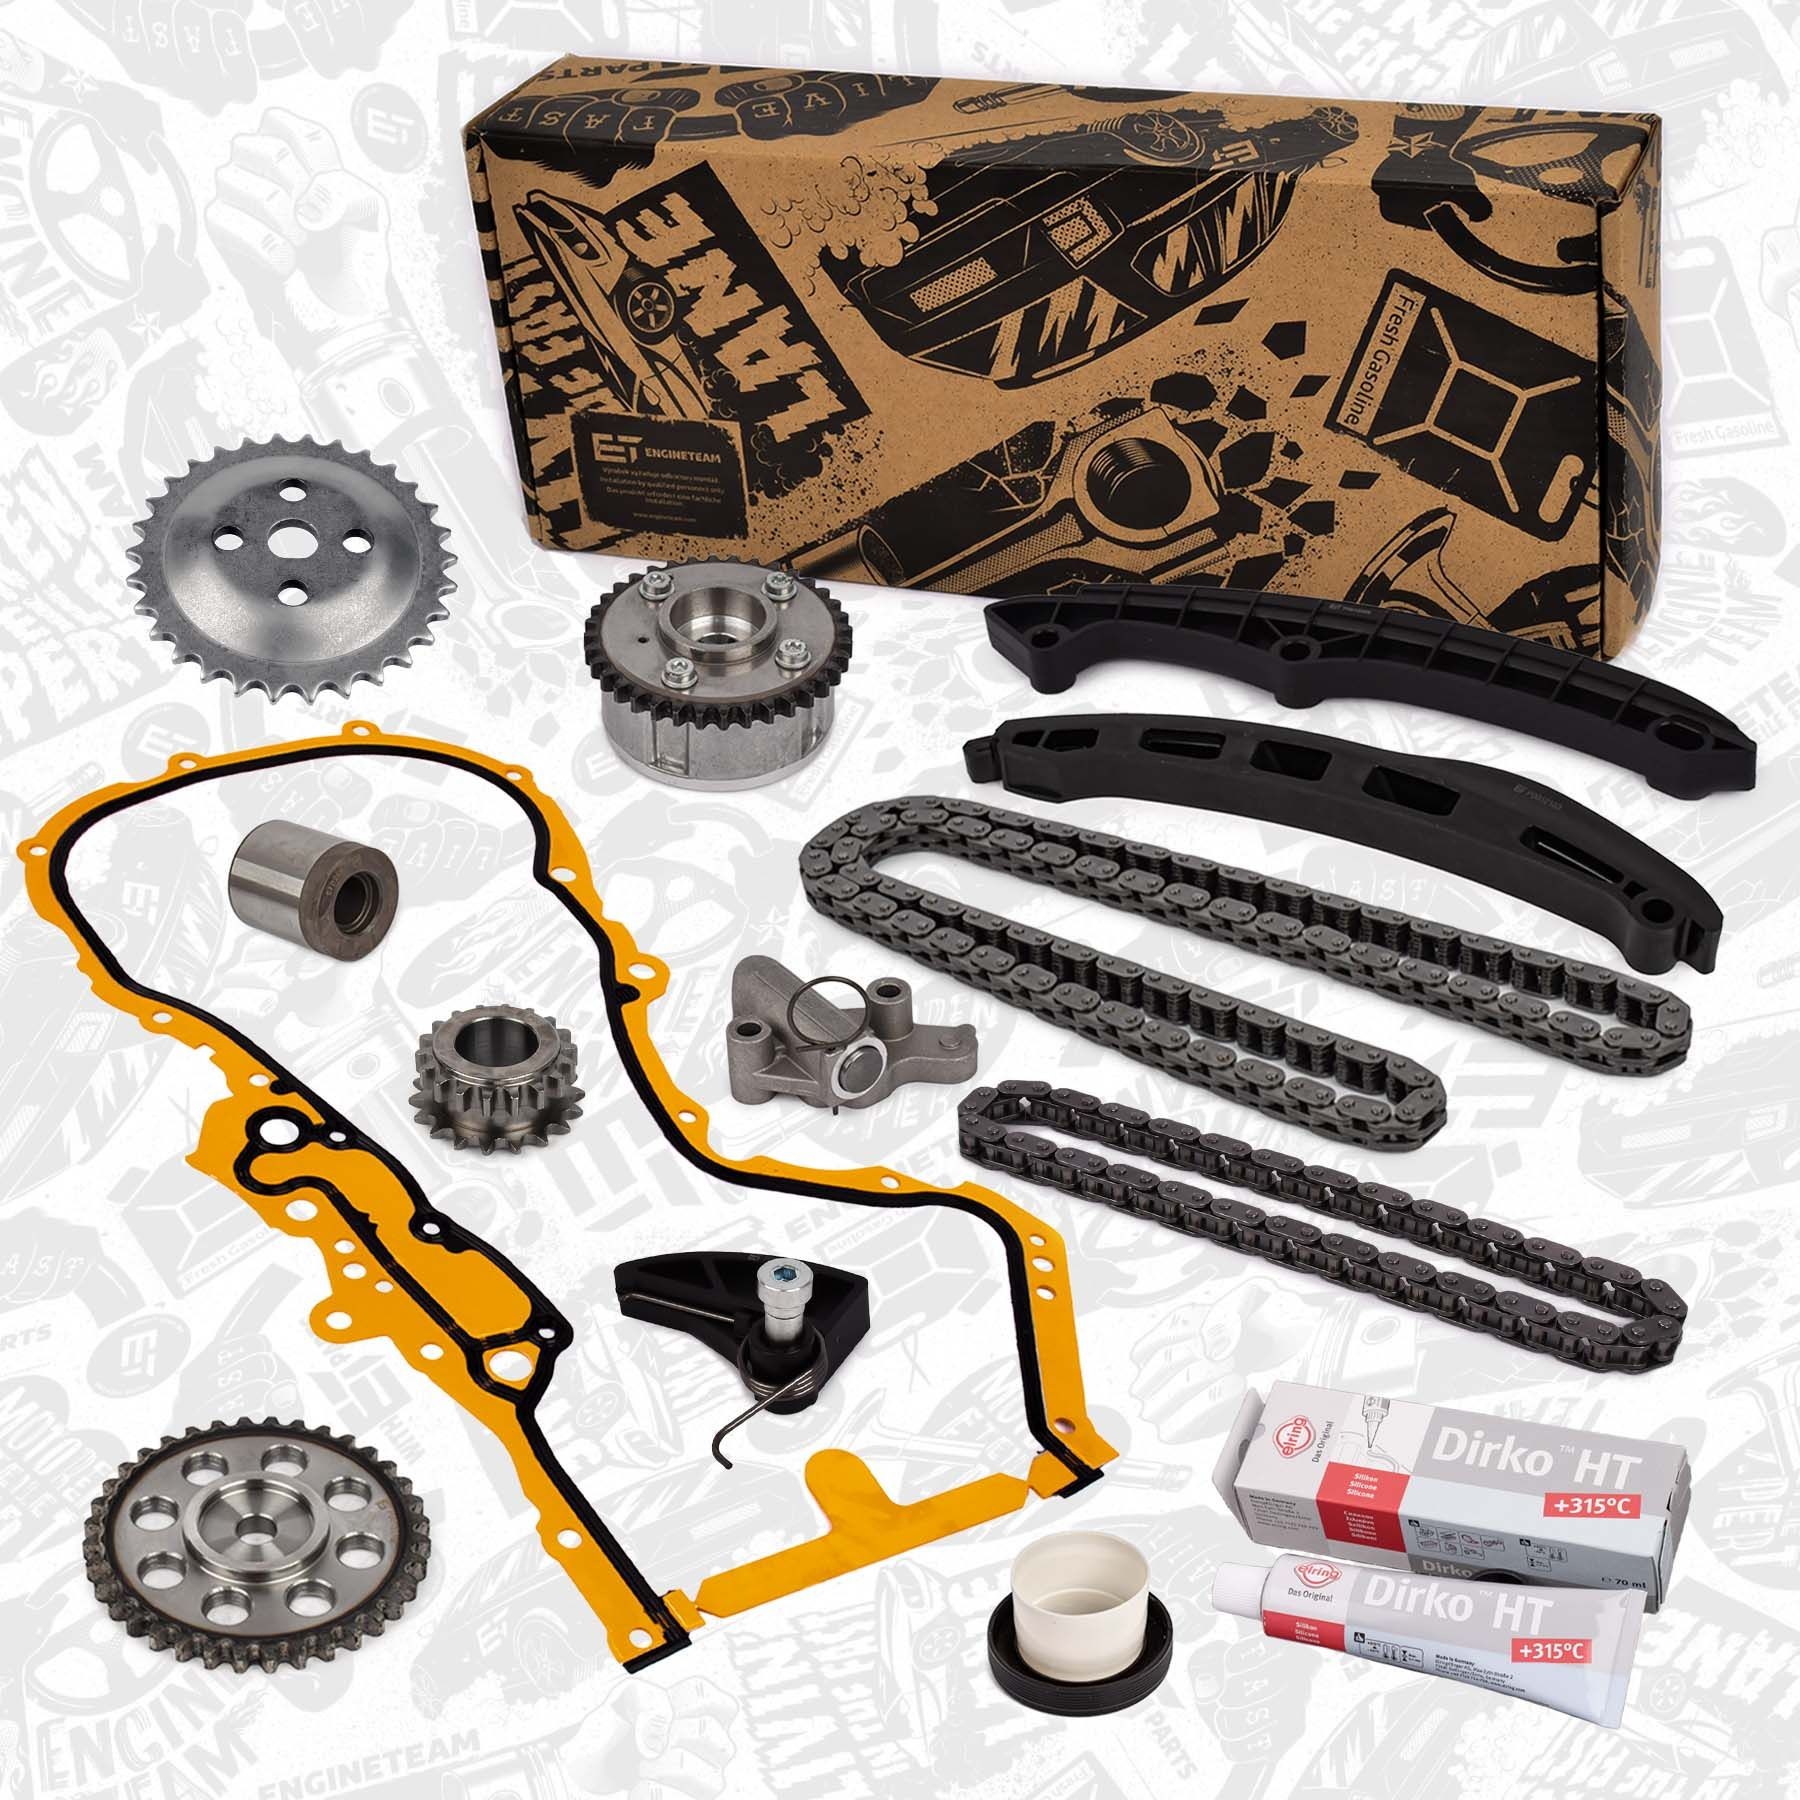 RS0049VR7 ET ENGINETEAM Timing chain set AUDI with gaskets/seals, with oil pump chain, with gears, Silent Chain